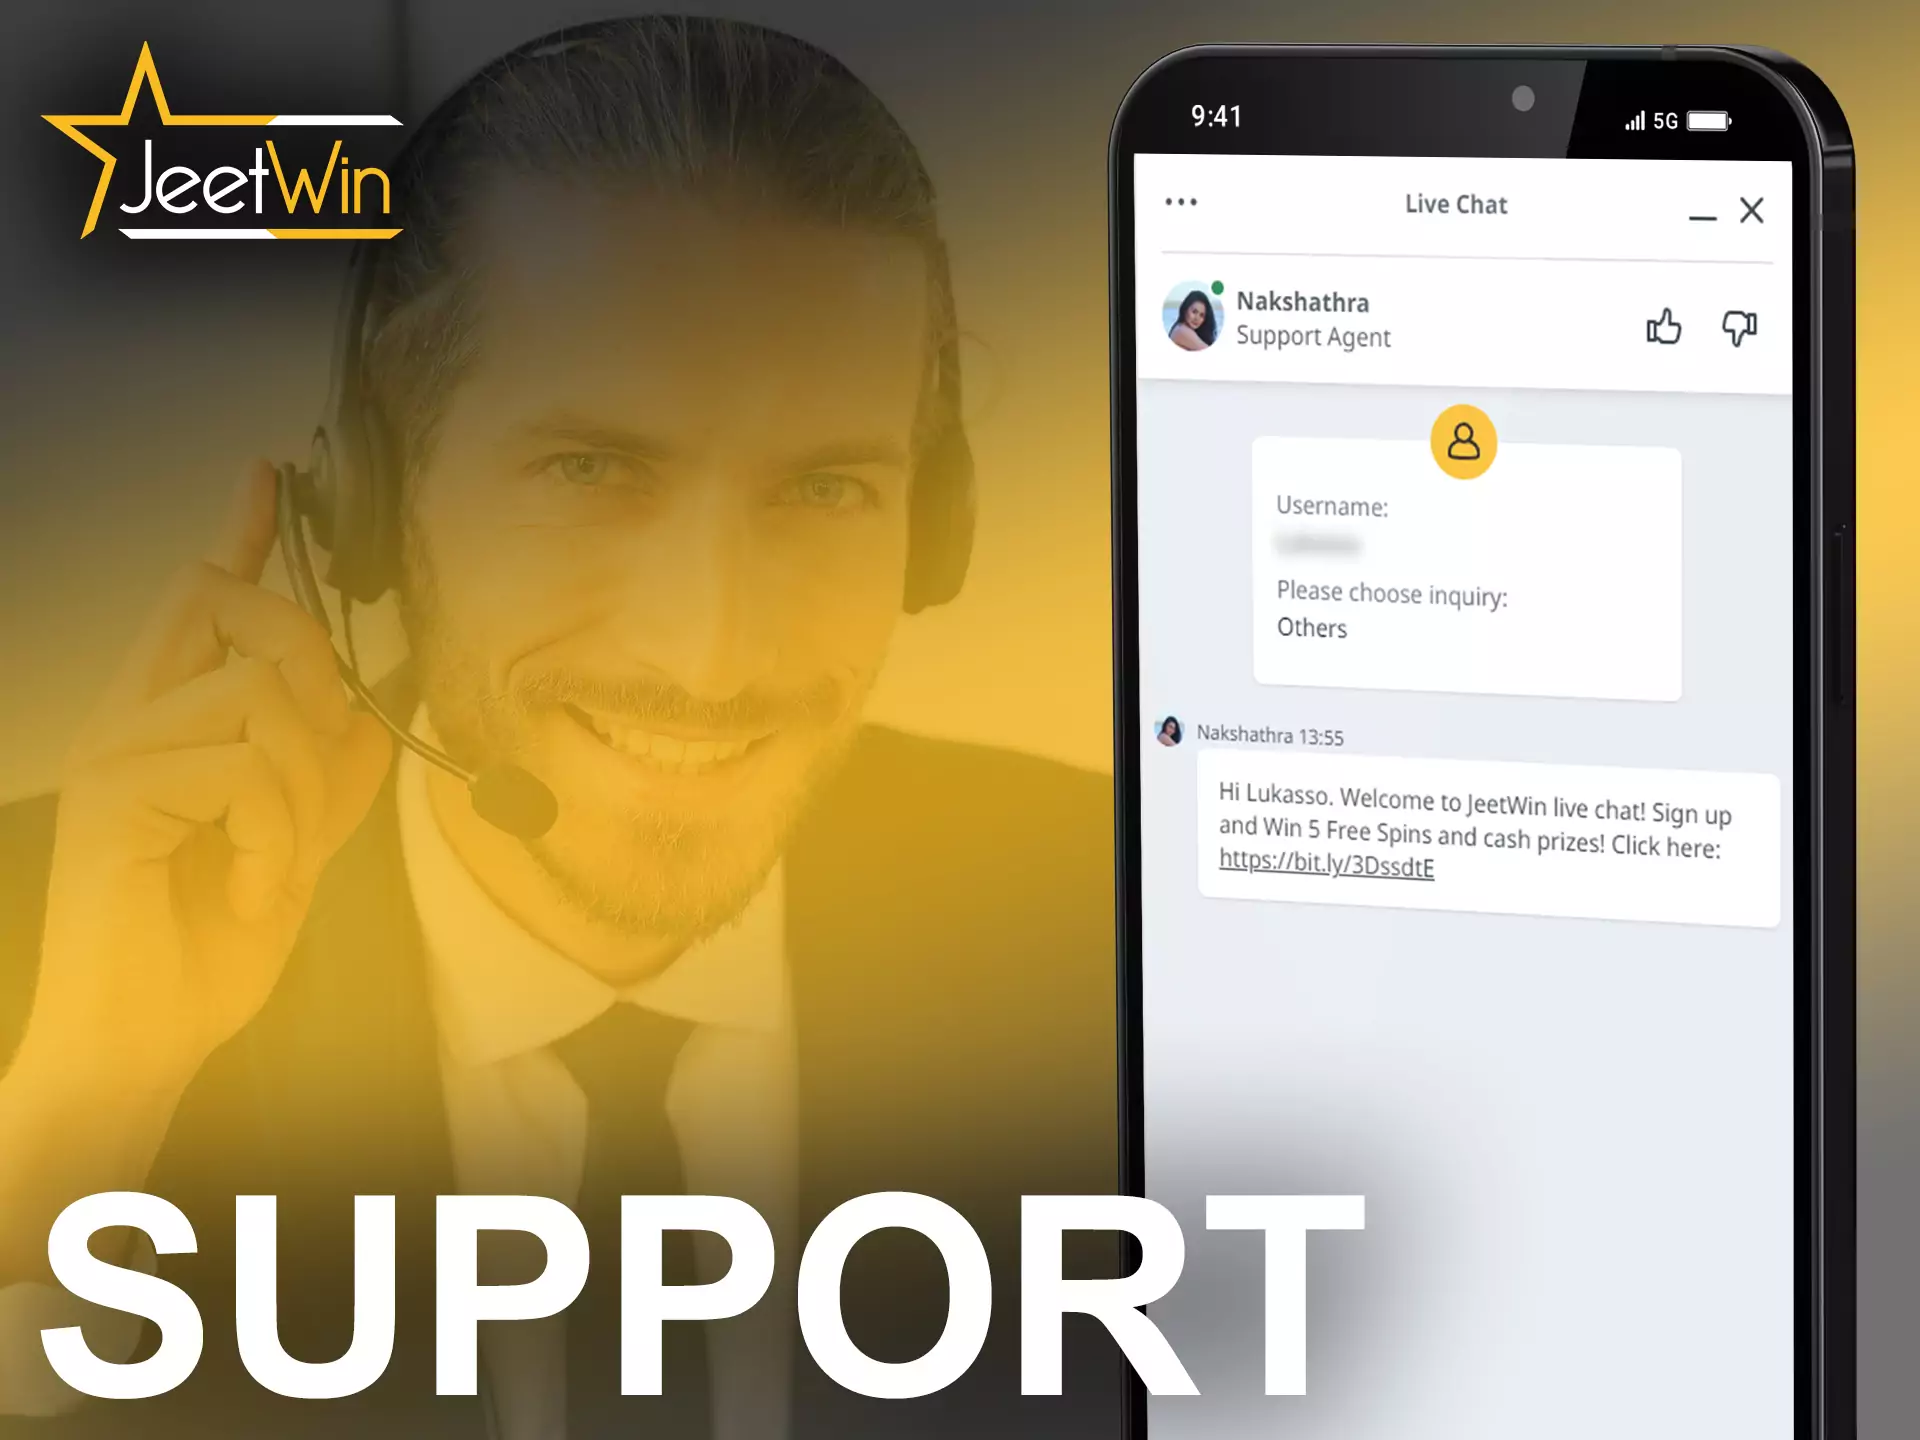 JeetWin support is ready to answer all your questions at any time.